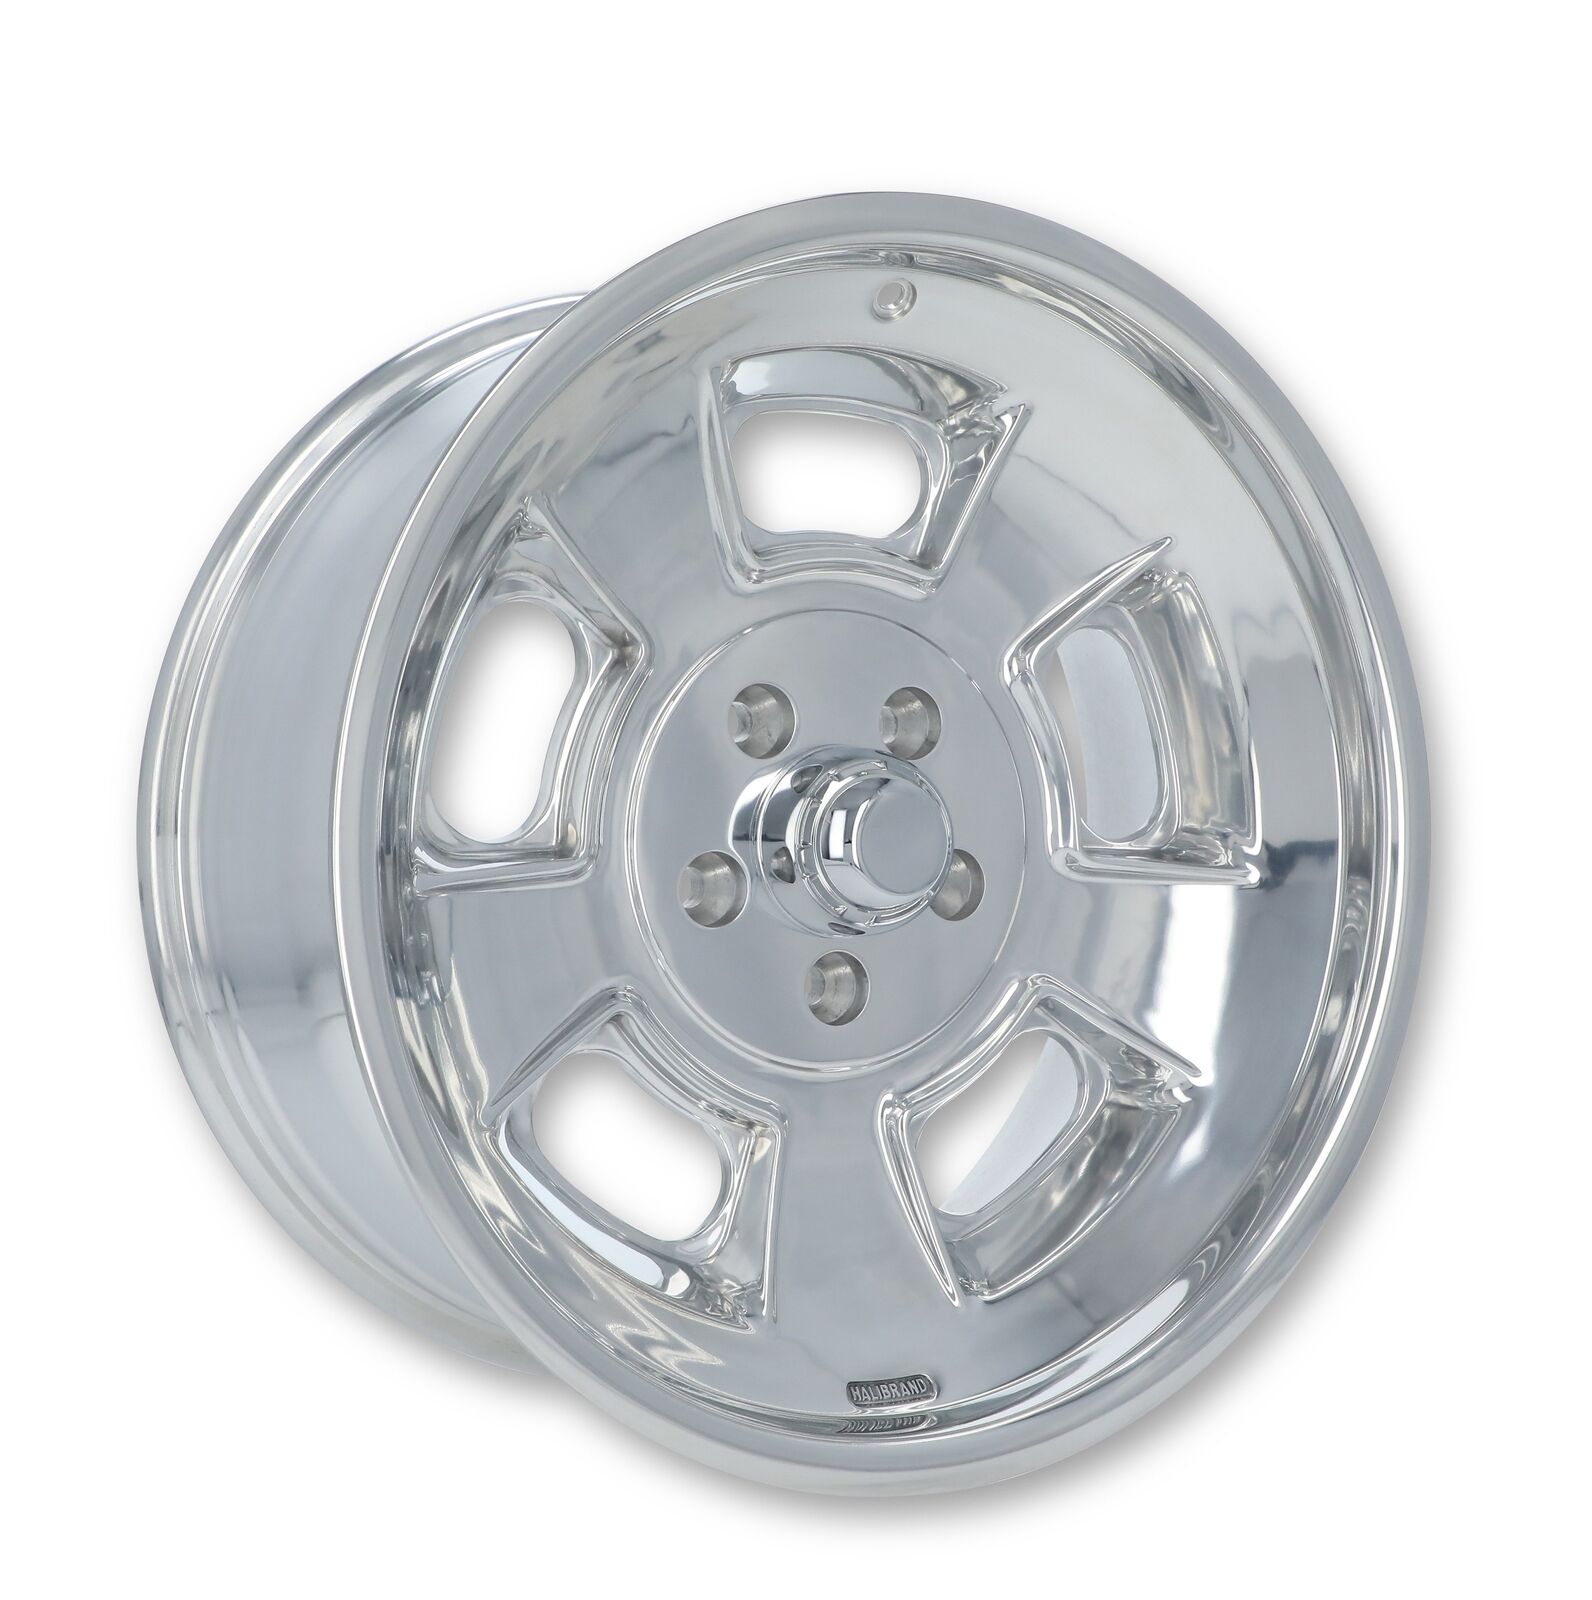 Halibrand Sprint Flow Formed Wheel 19x8.5 - 4.5 bs Polished No Clearcoat - Each